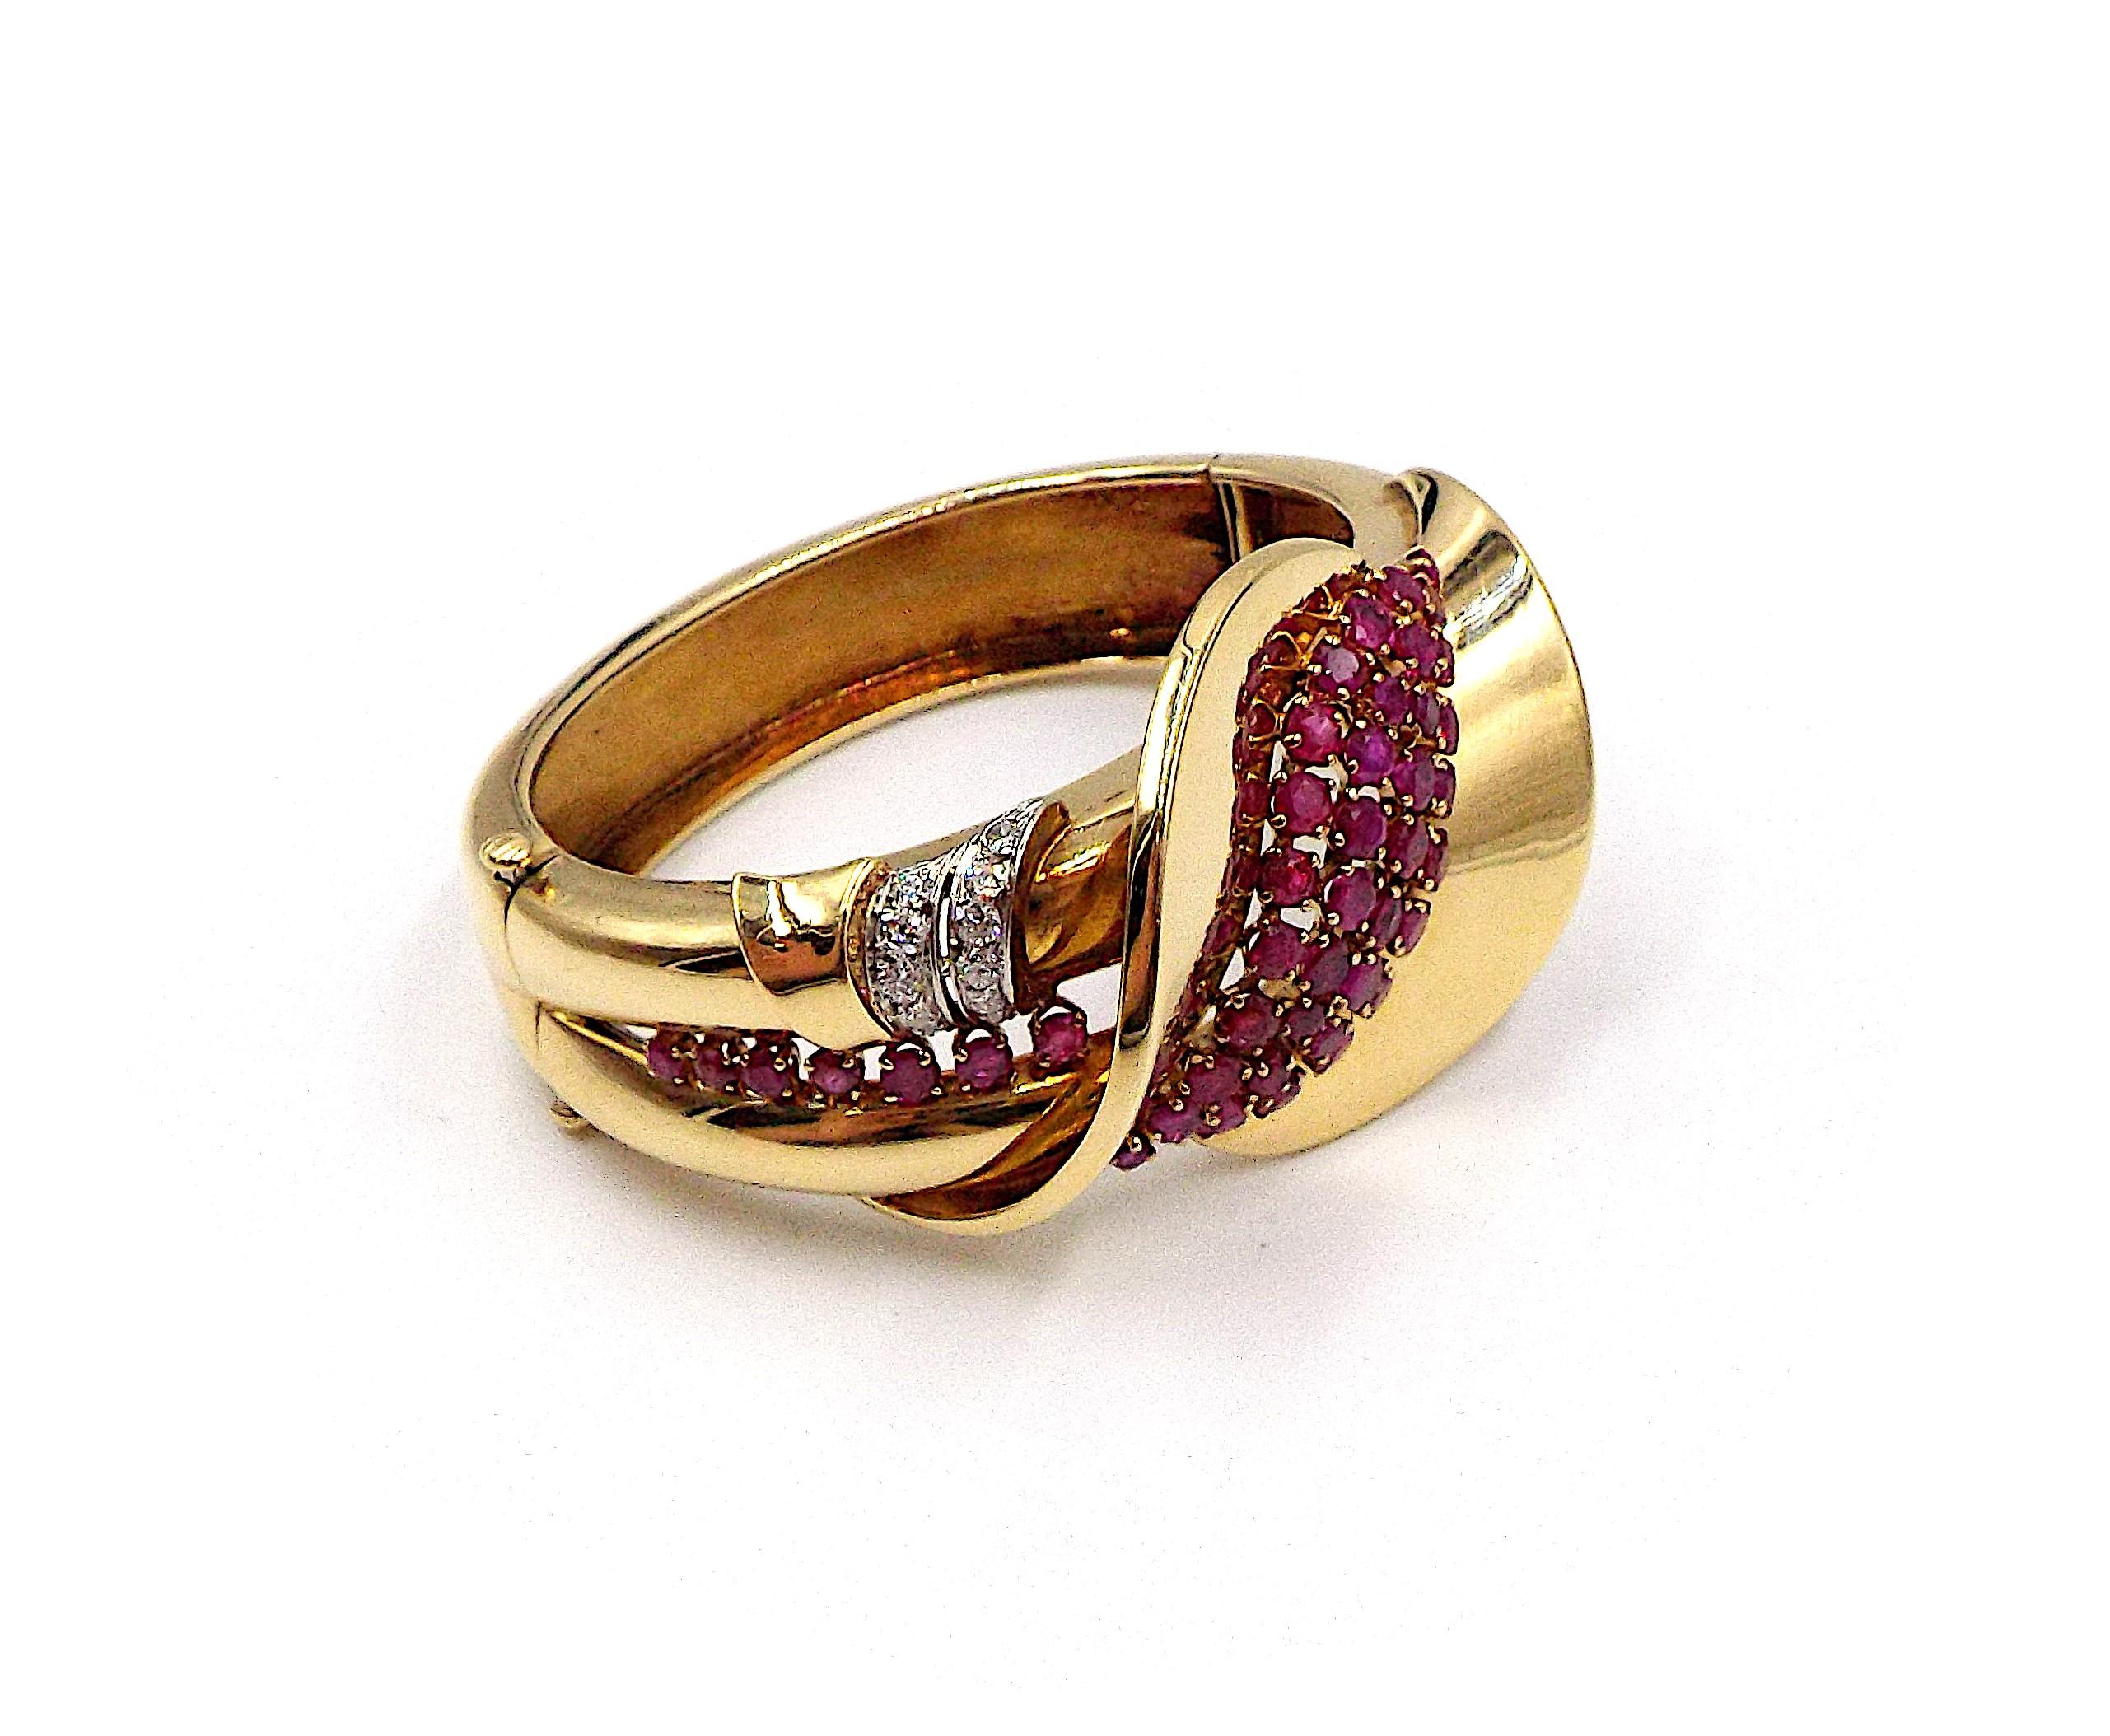 Round diamonds and rubies, yellow gold, circa 1950
Size/Dimensions: 16.2 x 4.0 cm (6 3⁄8 x 1 5⁄8 in)
Gross Weight: 69.4 grams
G to H color, VS to SI clarity. 1ct dias, 6ct rubies